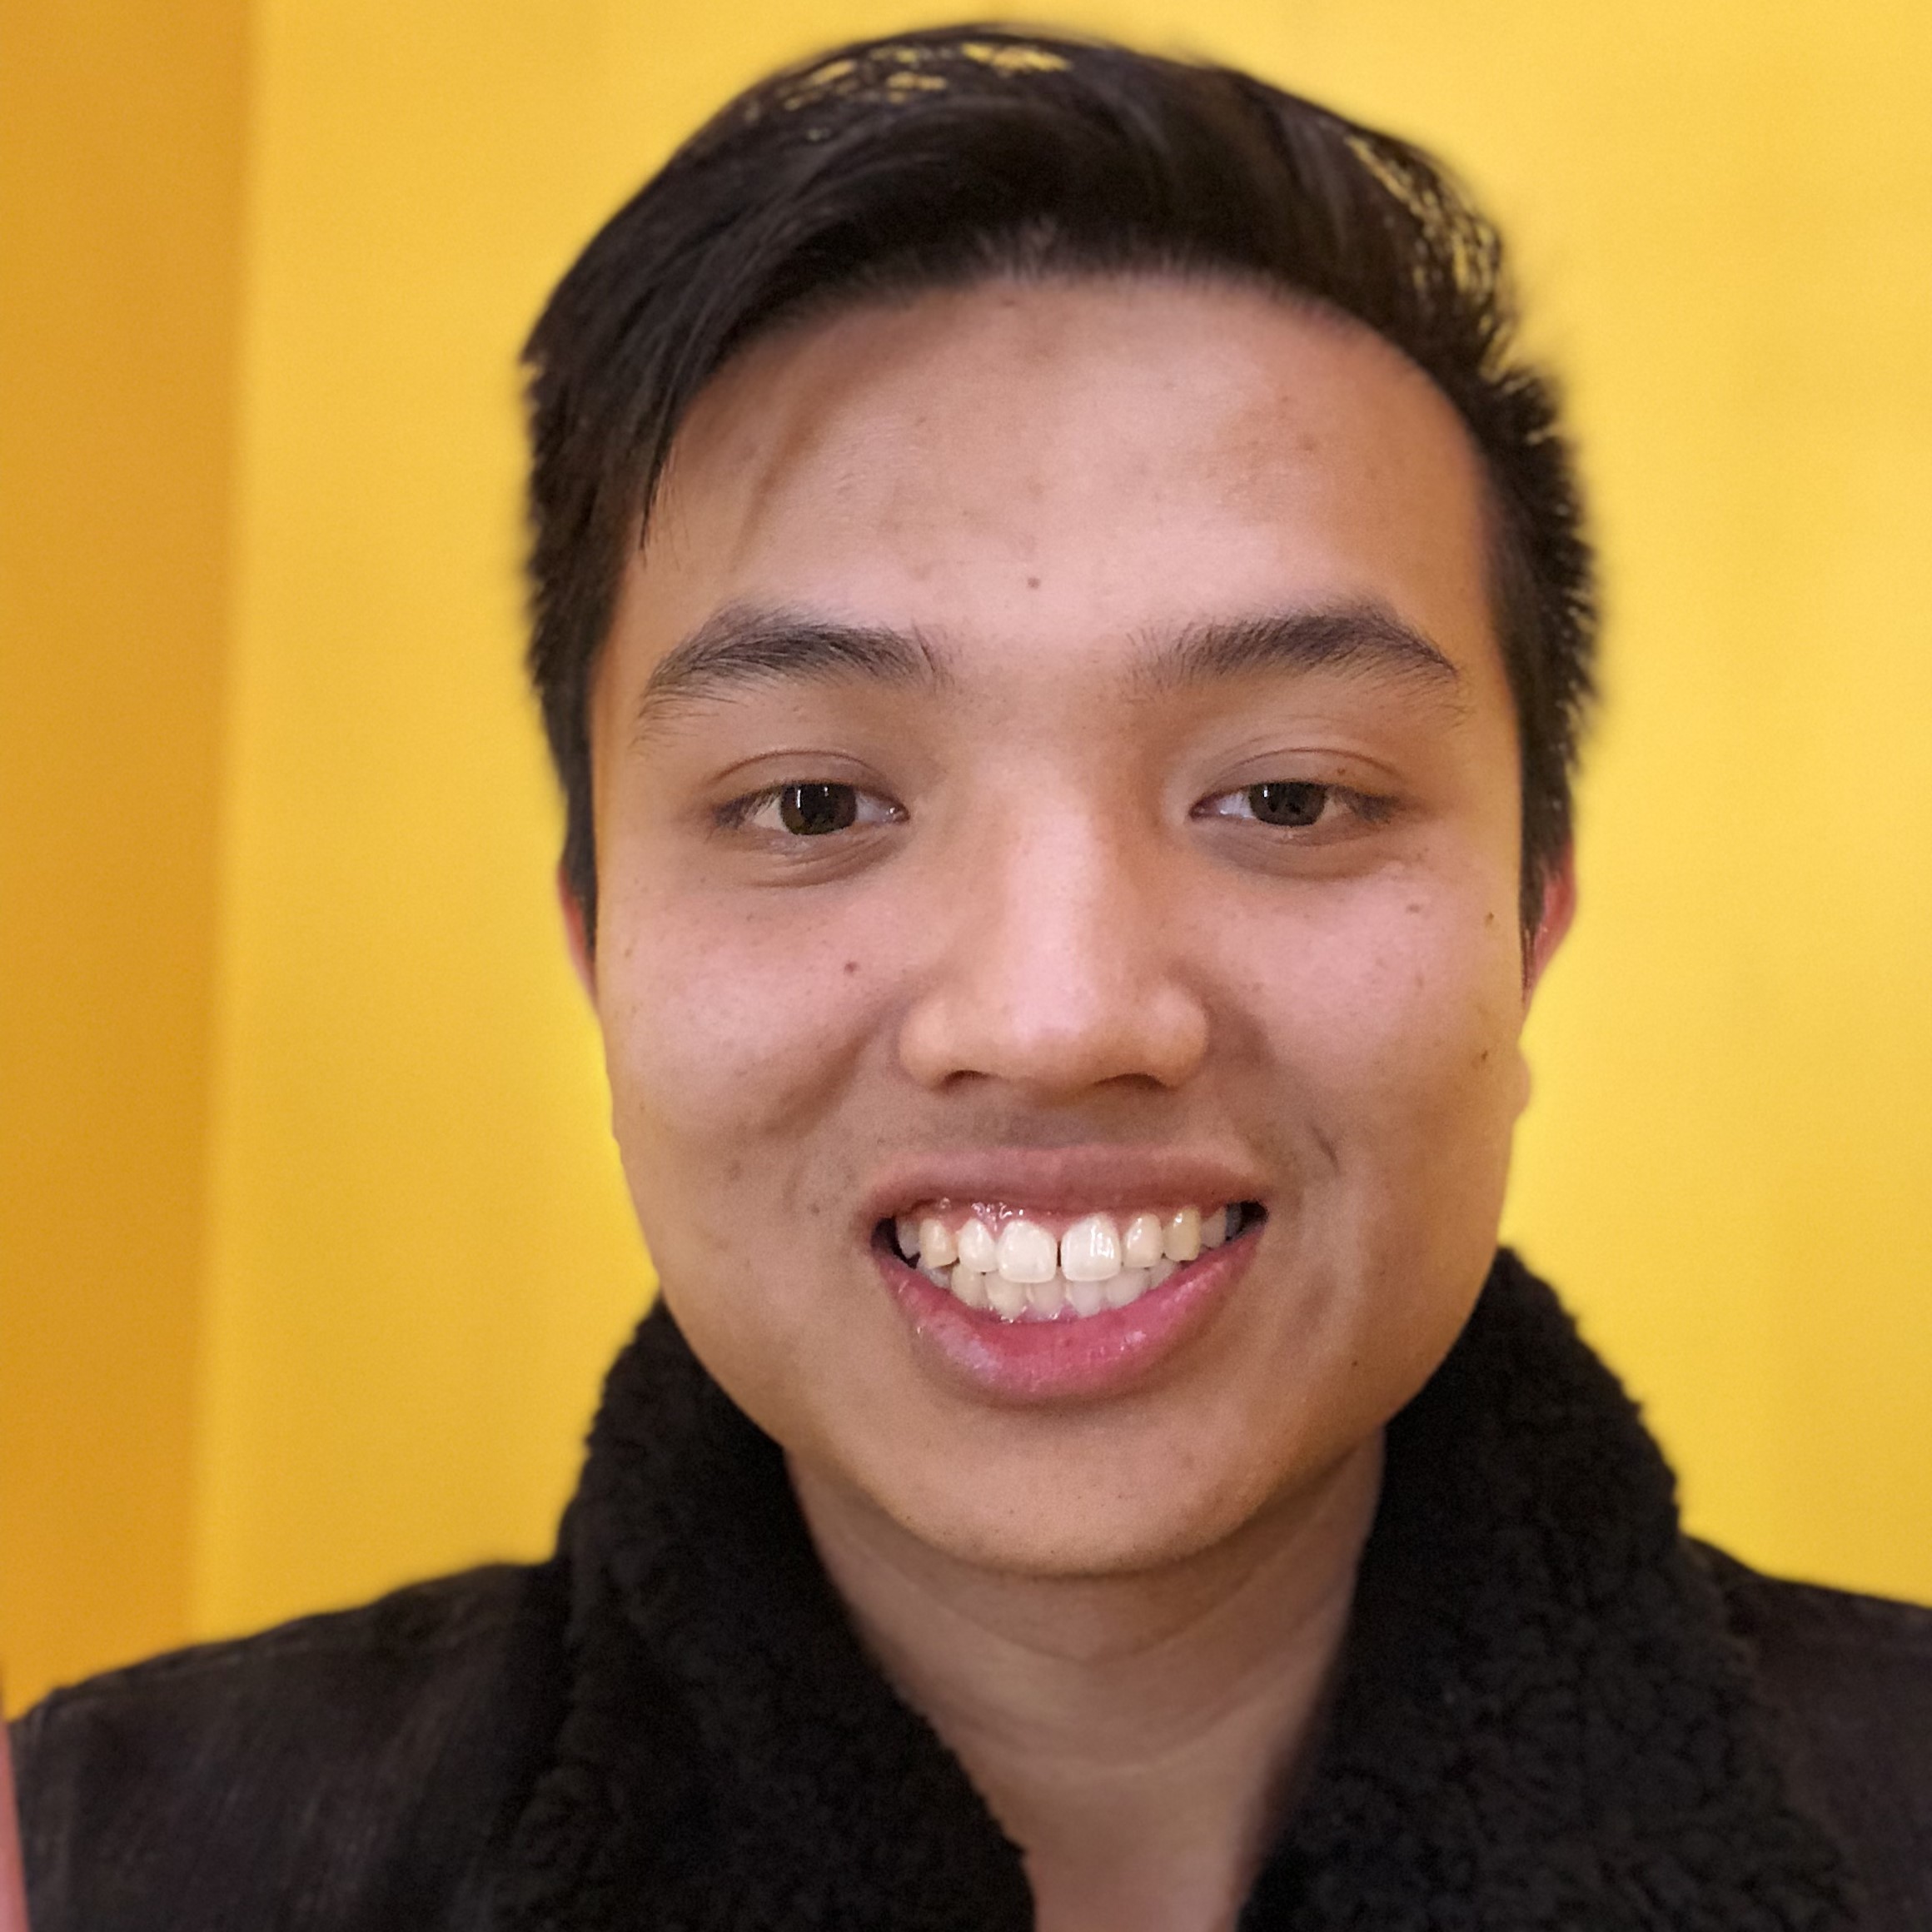 Headshot of former master's student Marvin with a yellow wall in the background